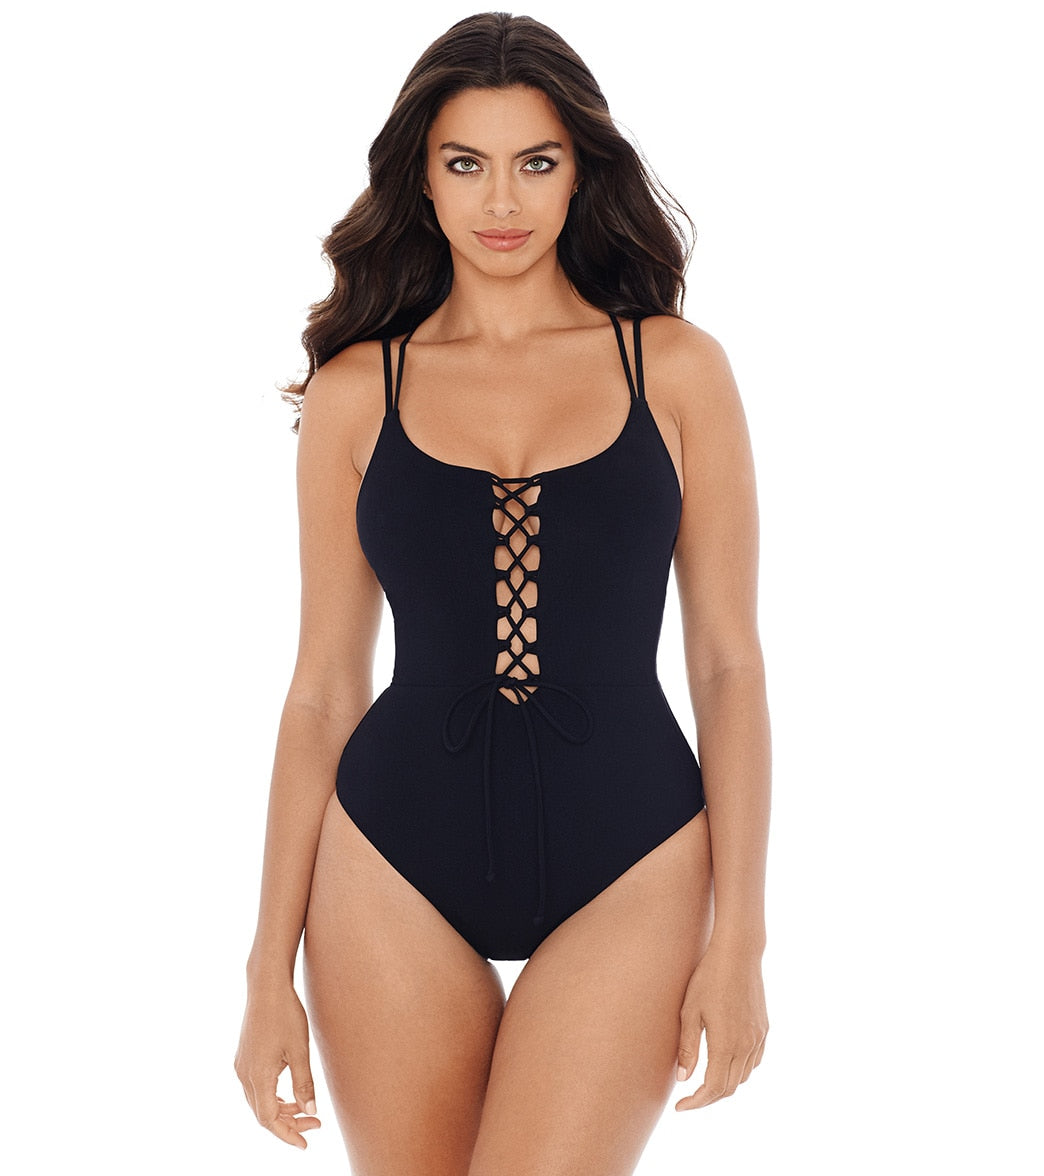 Skinny Dippers By Miraclesuit Women's Jelly Beans Suga Babe One Piece Swimsuit - Black Large - Swimoutlet.com